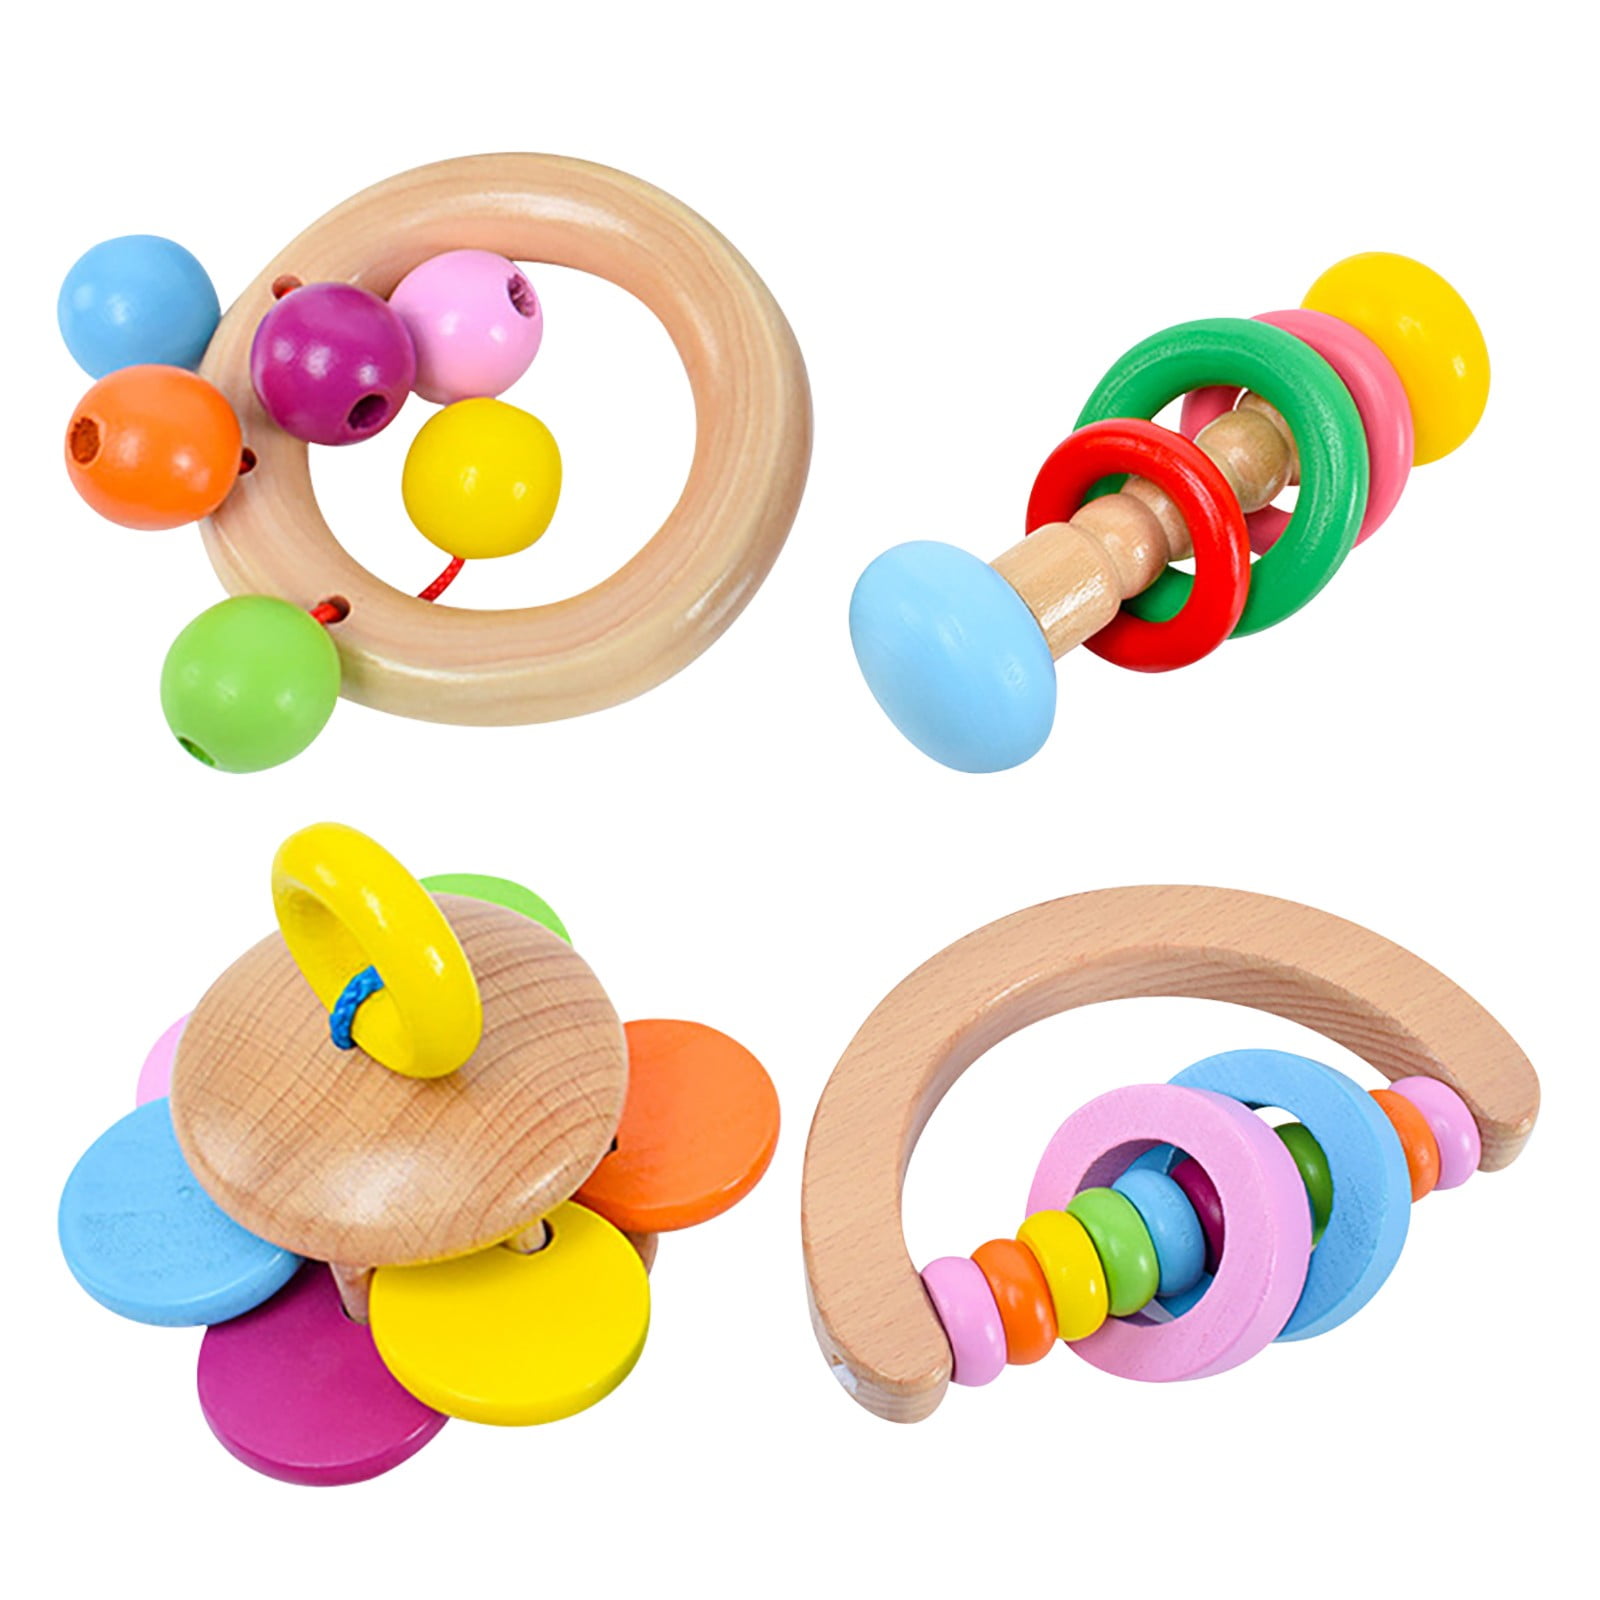 3 Pieces Baby Rattle Kids Multi-Sensory Handbell Clutching Toy Birthday Gift 